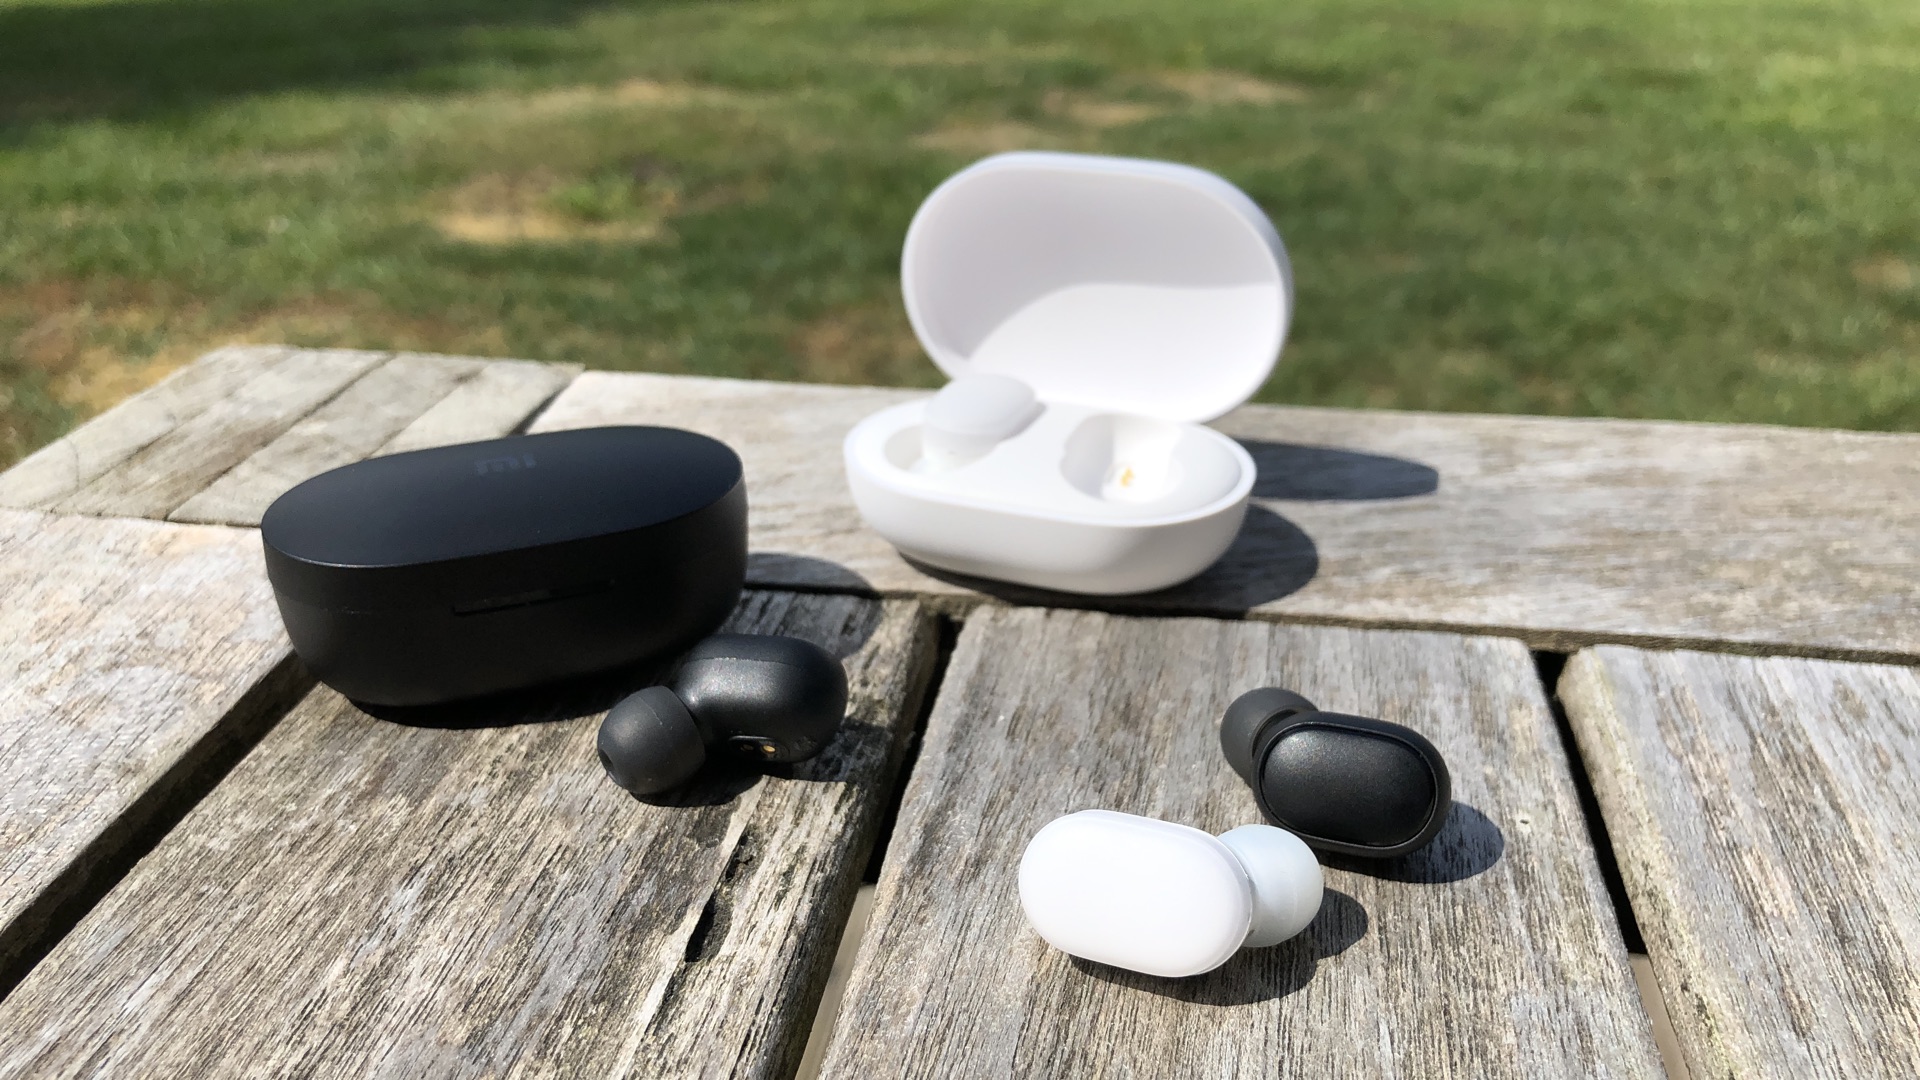 The Redmi Airdots (in black) are smaller than the original AirDots (in white). They also have a physical button instead of a touch button